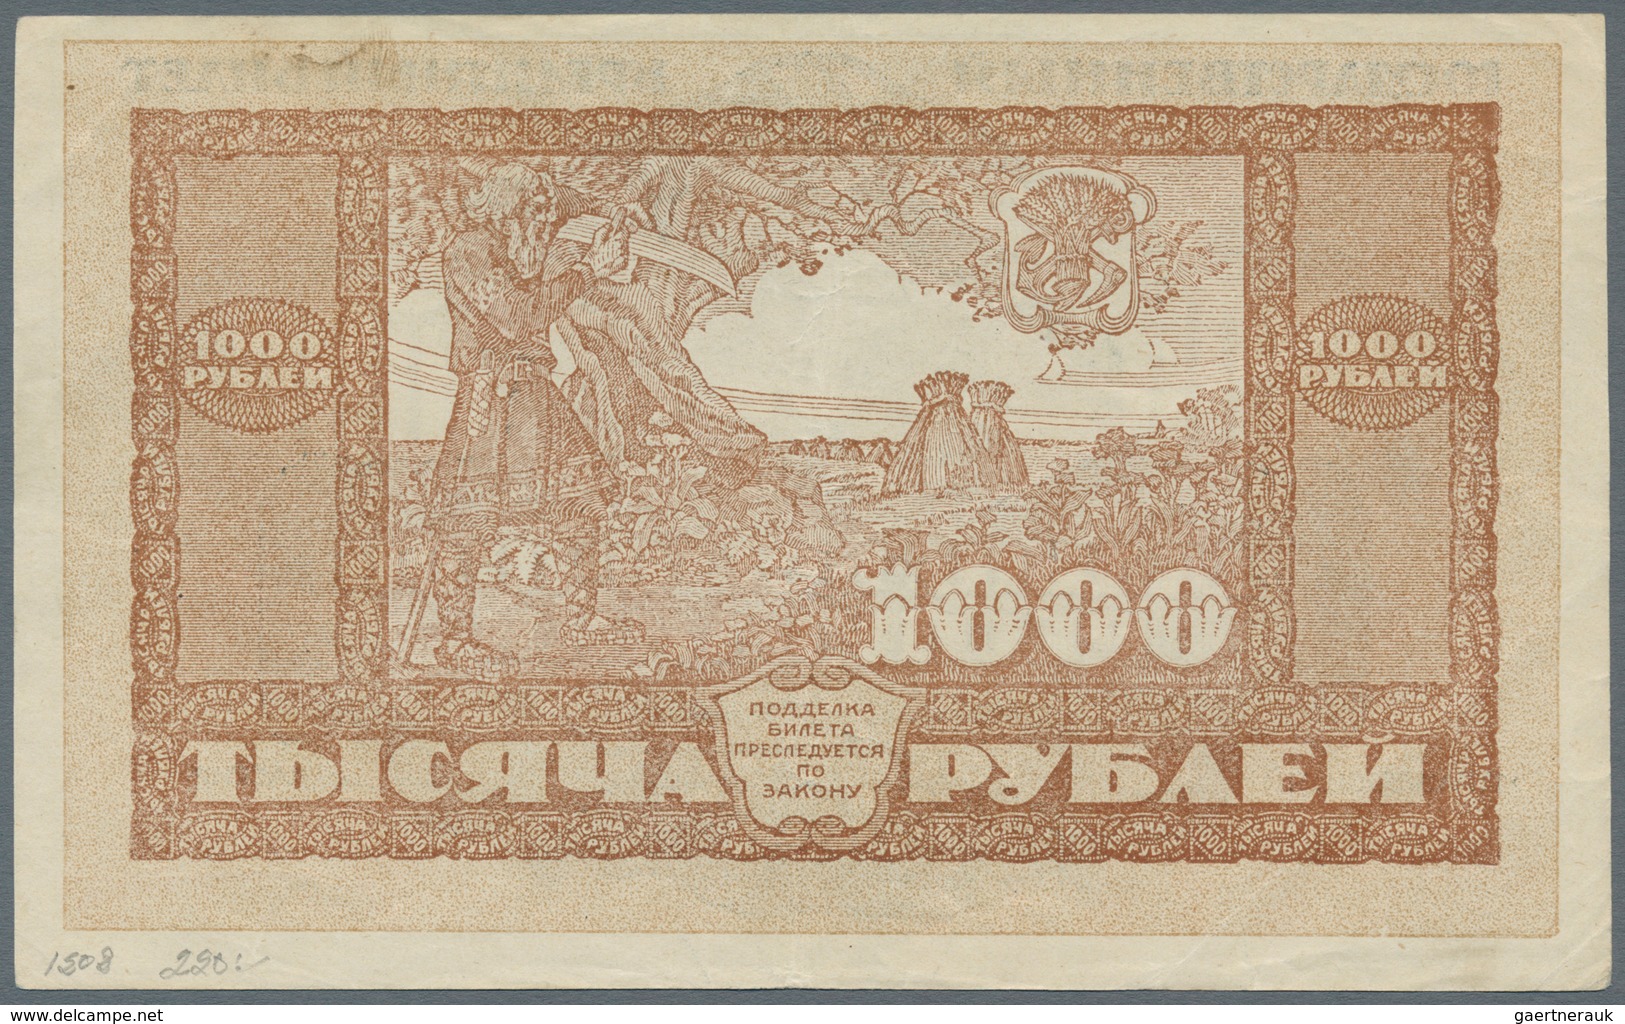 Russia / Russland: East Siberia and Far Eastern Republic set with 5 Banknotes containing 500 and 100